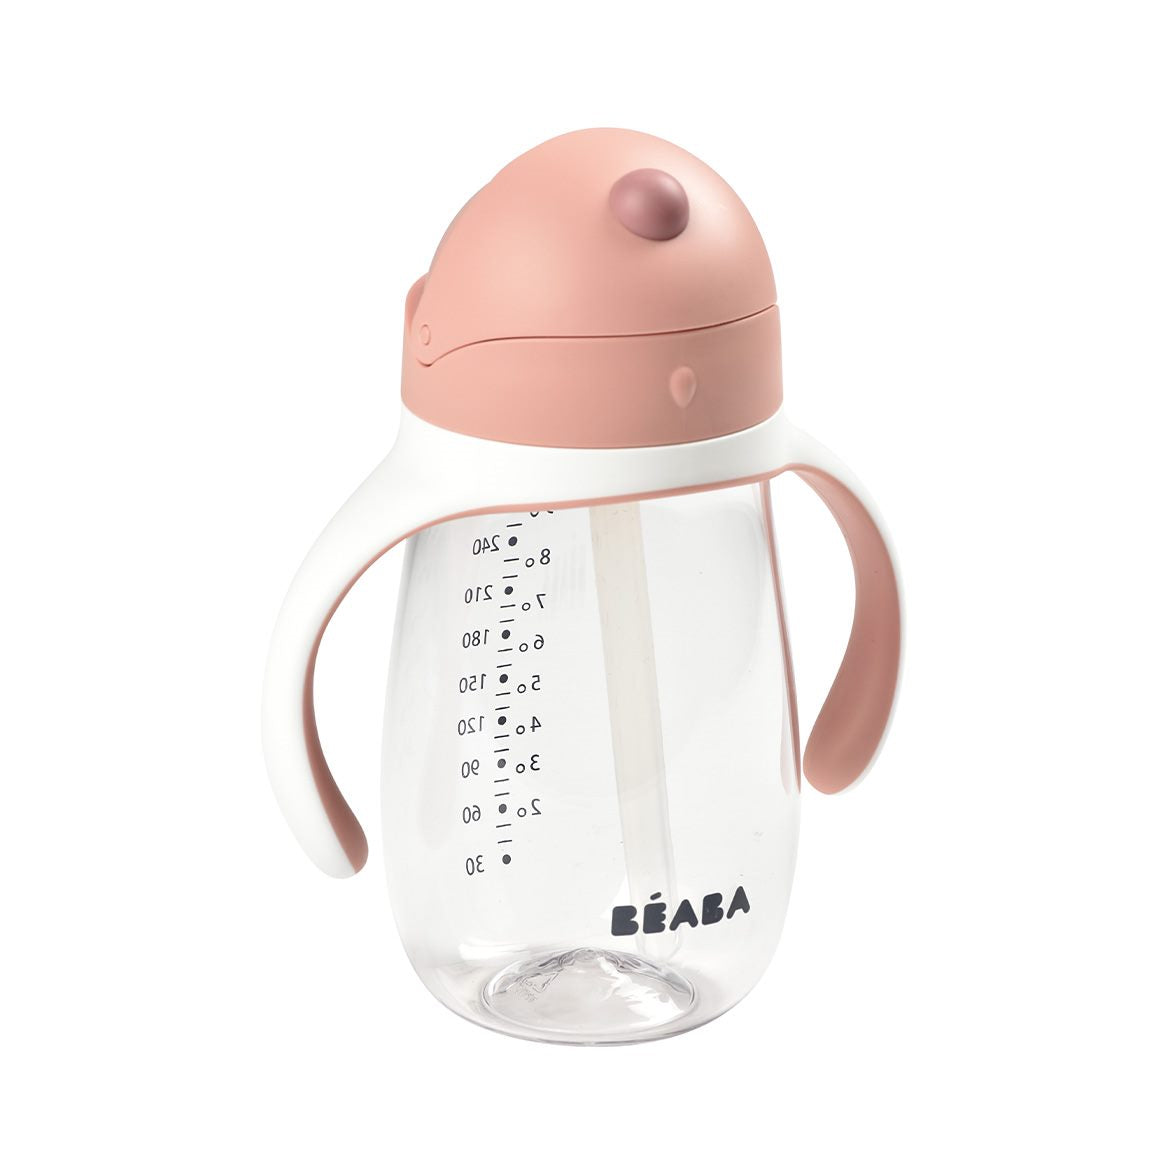 Beaba Sippy Cup - Old Pink